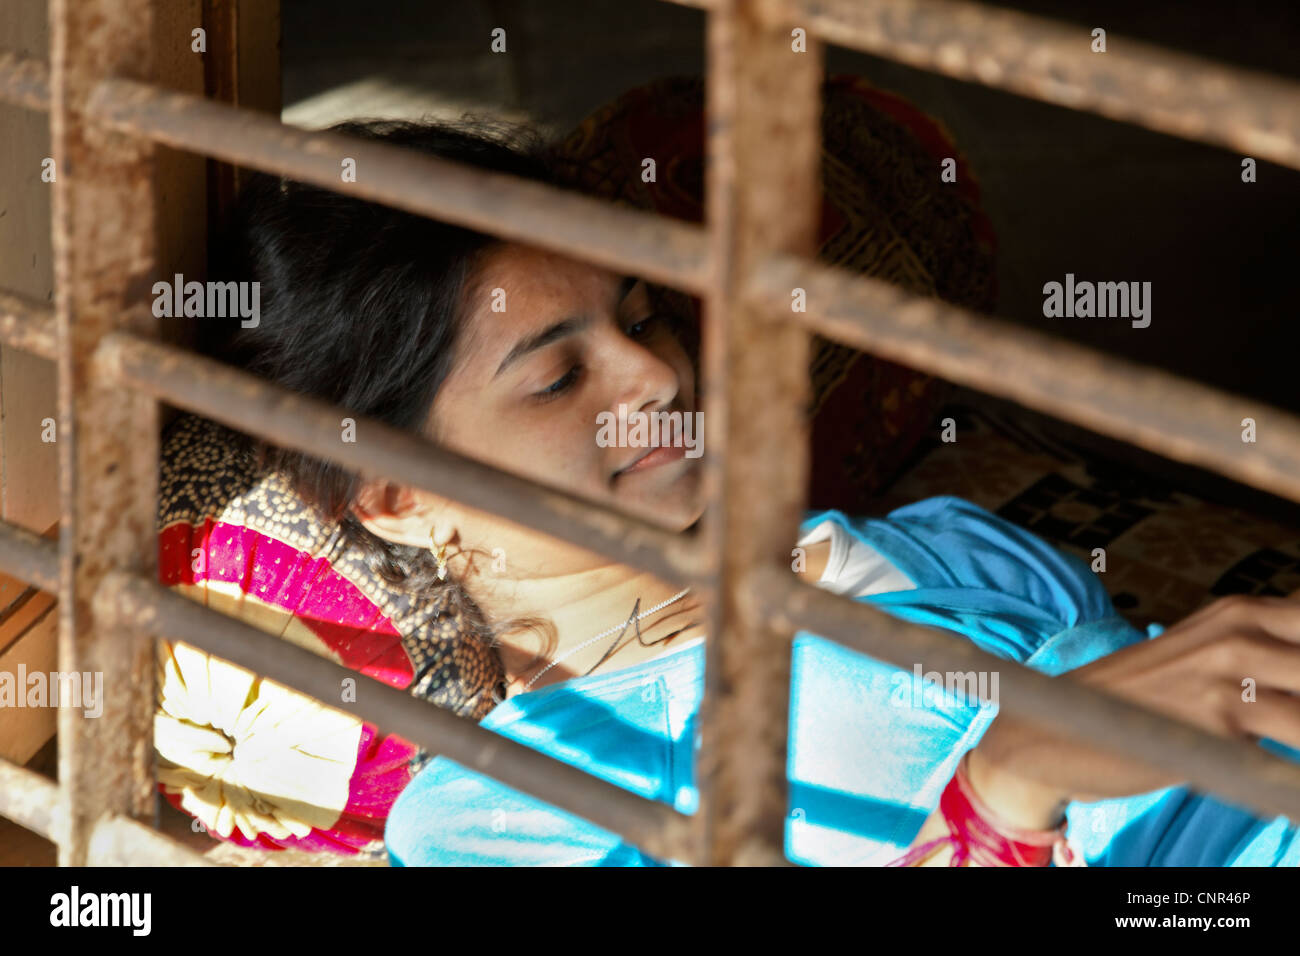 country life in India, young lady relaxes at an open window taking in the sun beams Stock Photo